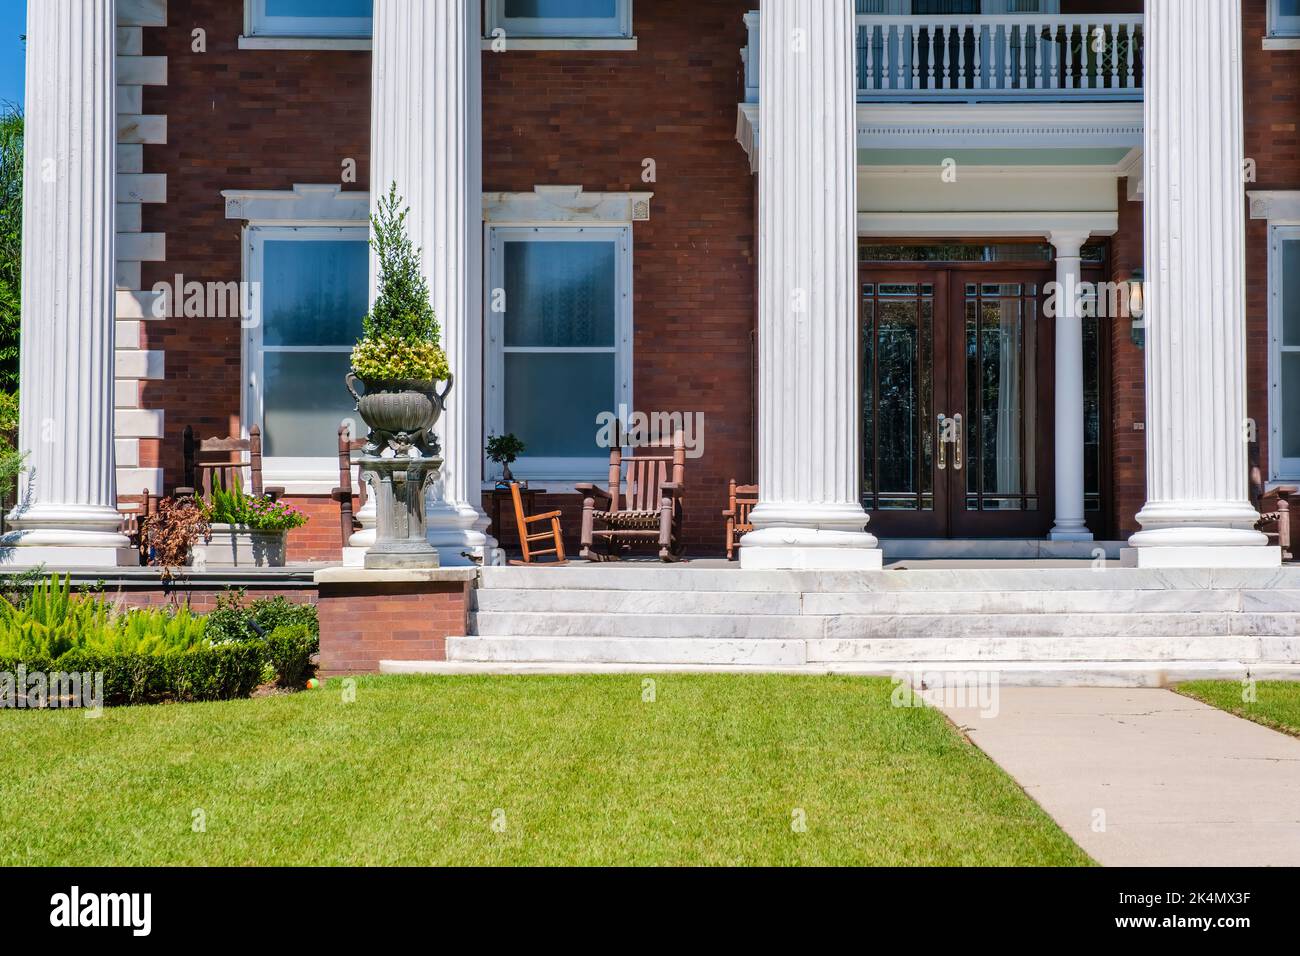 NEW ORLEANS, LA, USA - SEPTEMBER 27, 2022: Portion of front porch of mansion on St. Charles Avenue showing lawn, architectural features, and furniture Stock Photo